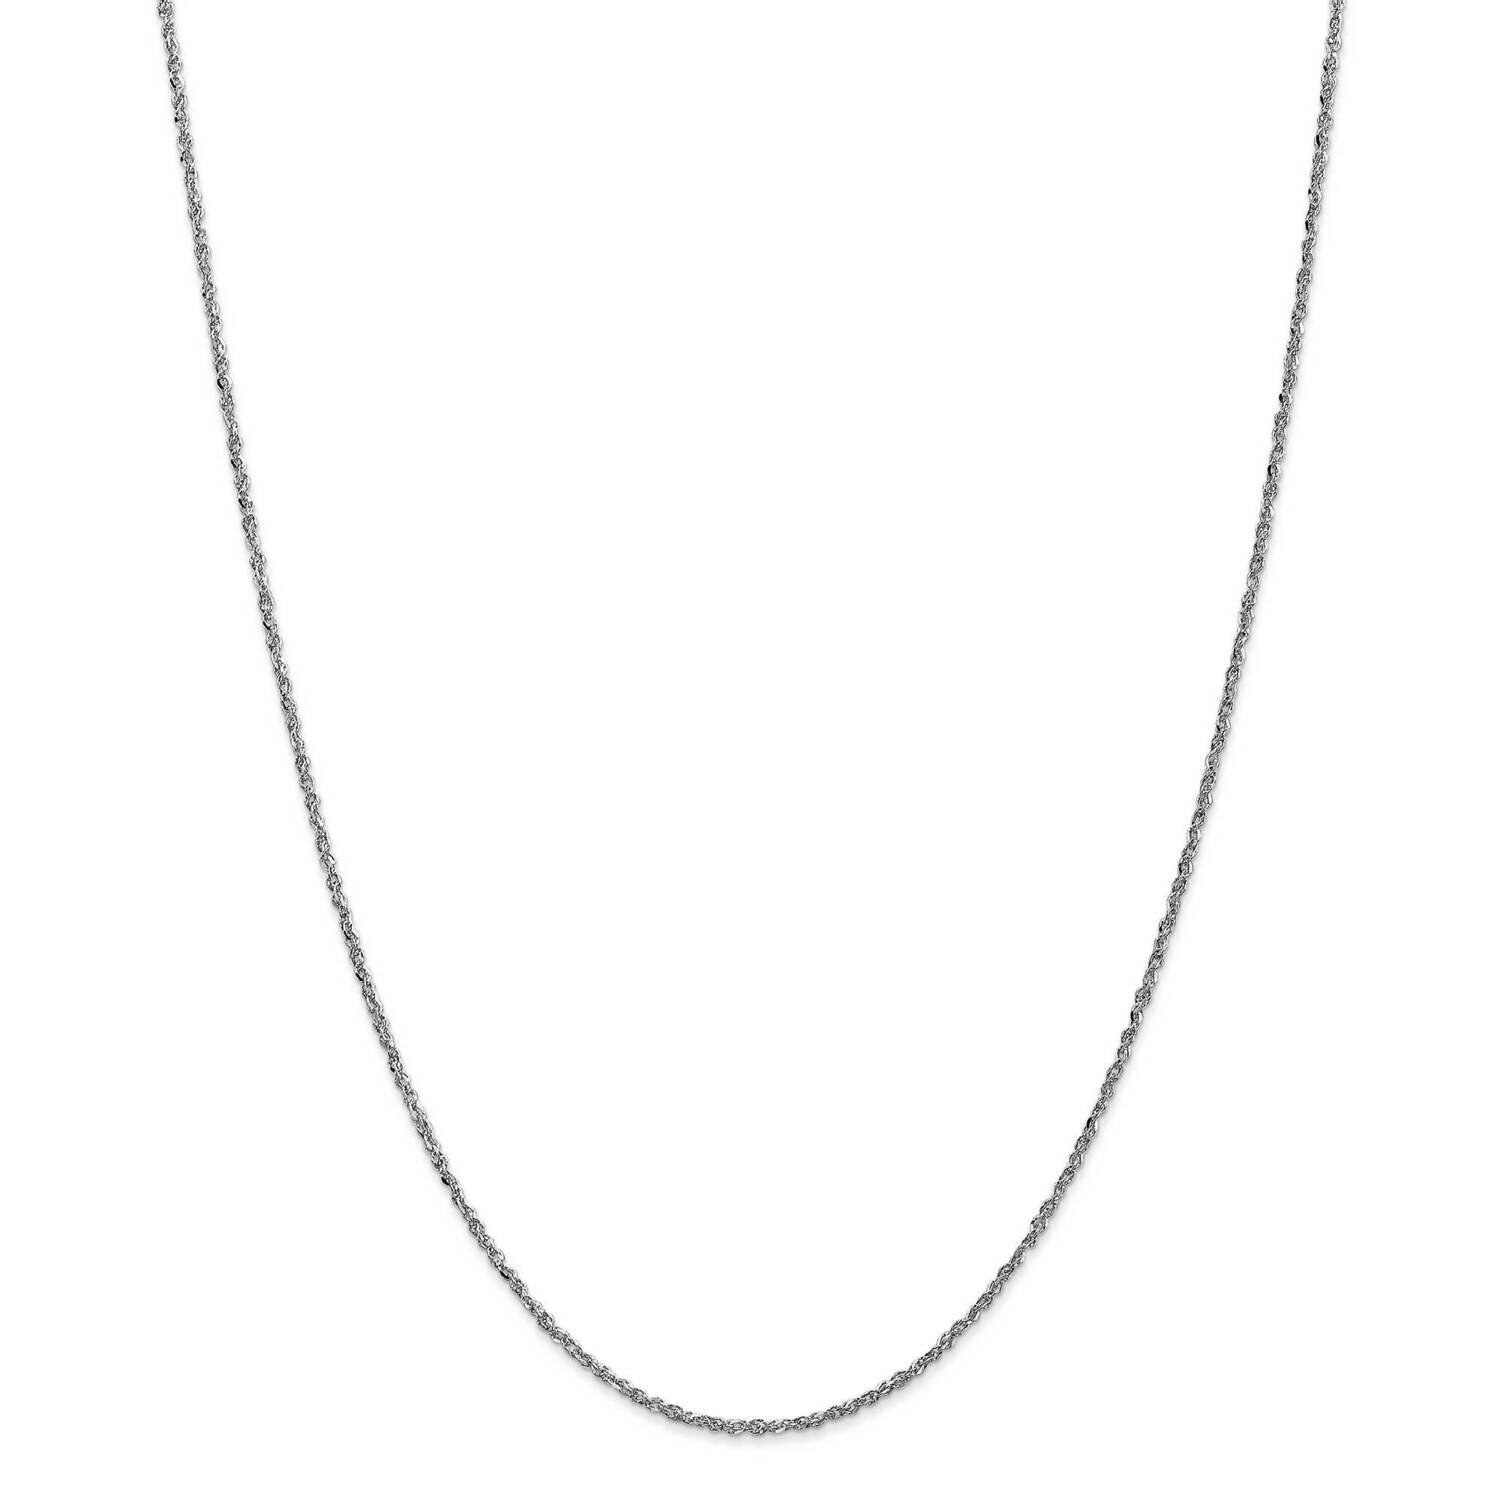 1.7mm Ropa Chain 22 Inch 14k White Gold WRPA028-22